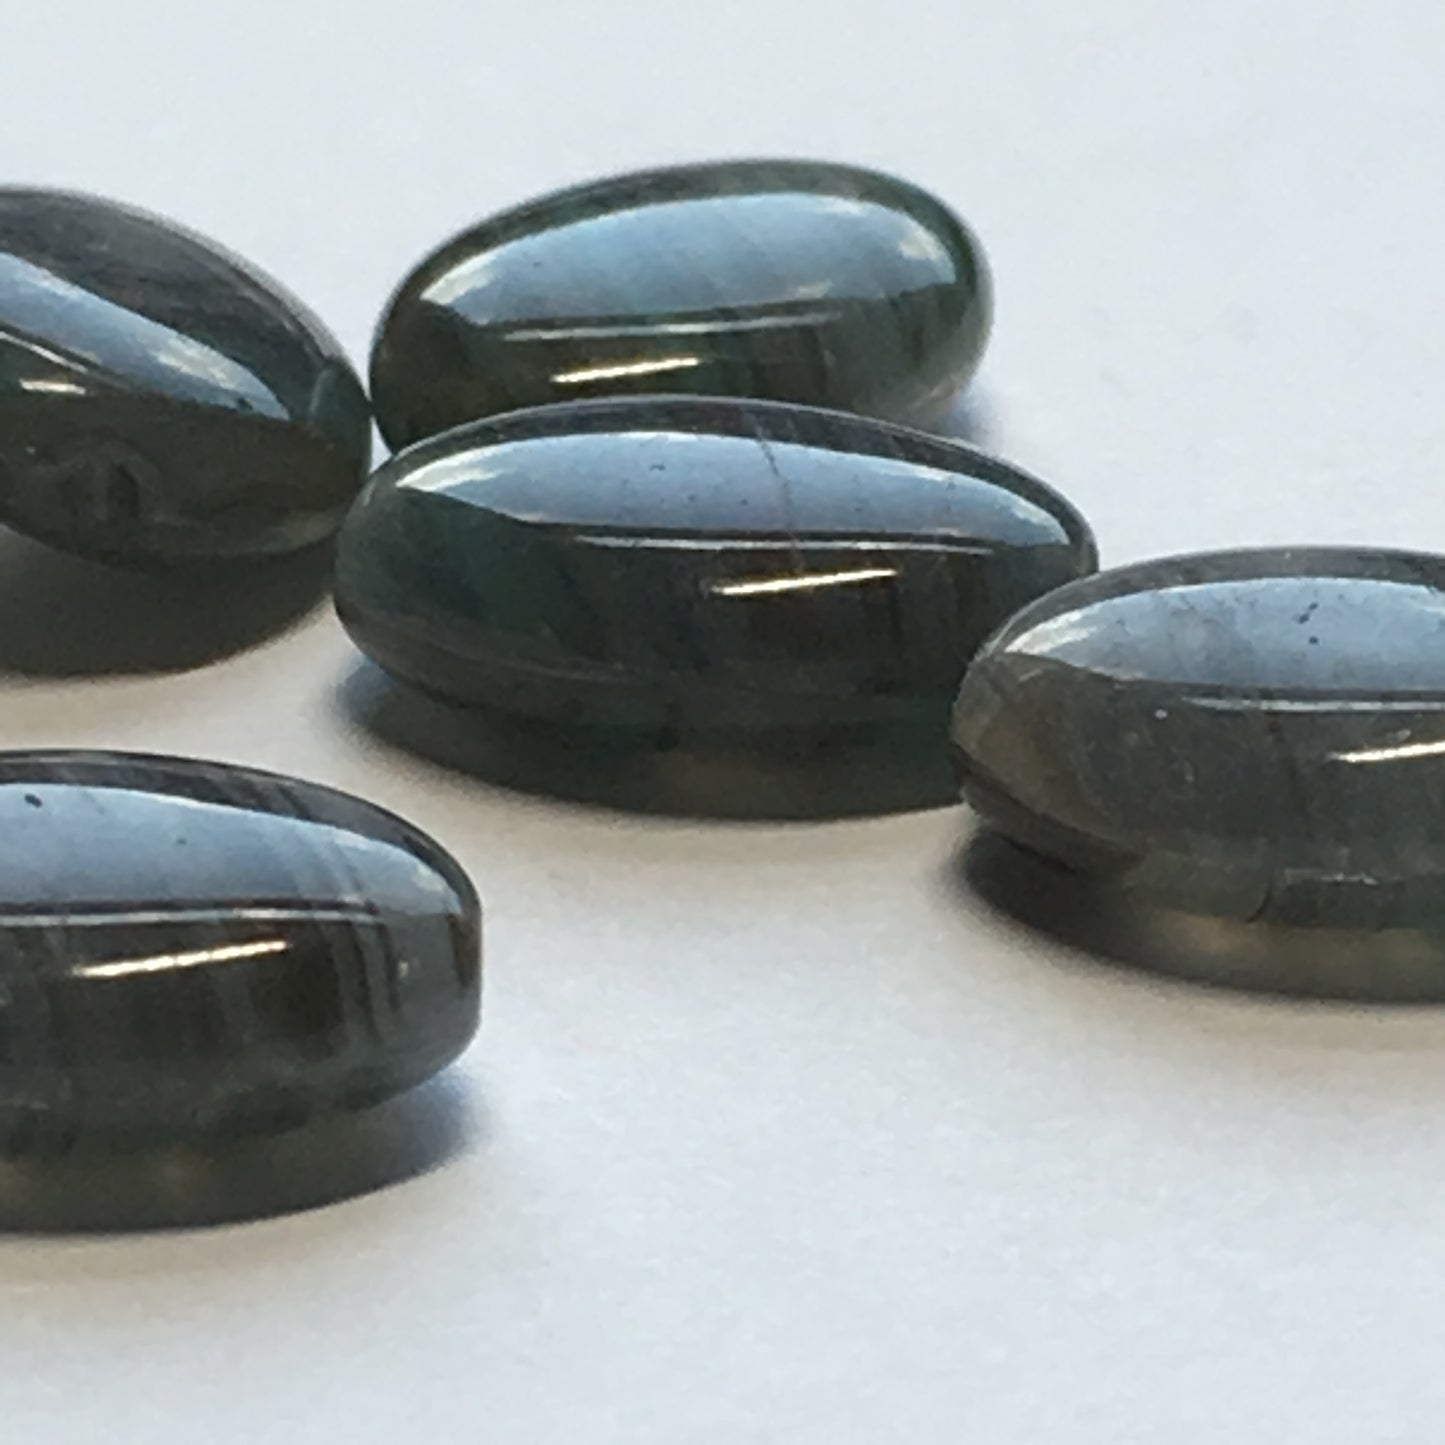 Gray, Green and Black Striped Oval Flat Glass Beads, 12 x 9 x 4 mm, 6 Beads